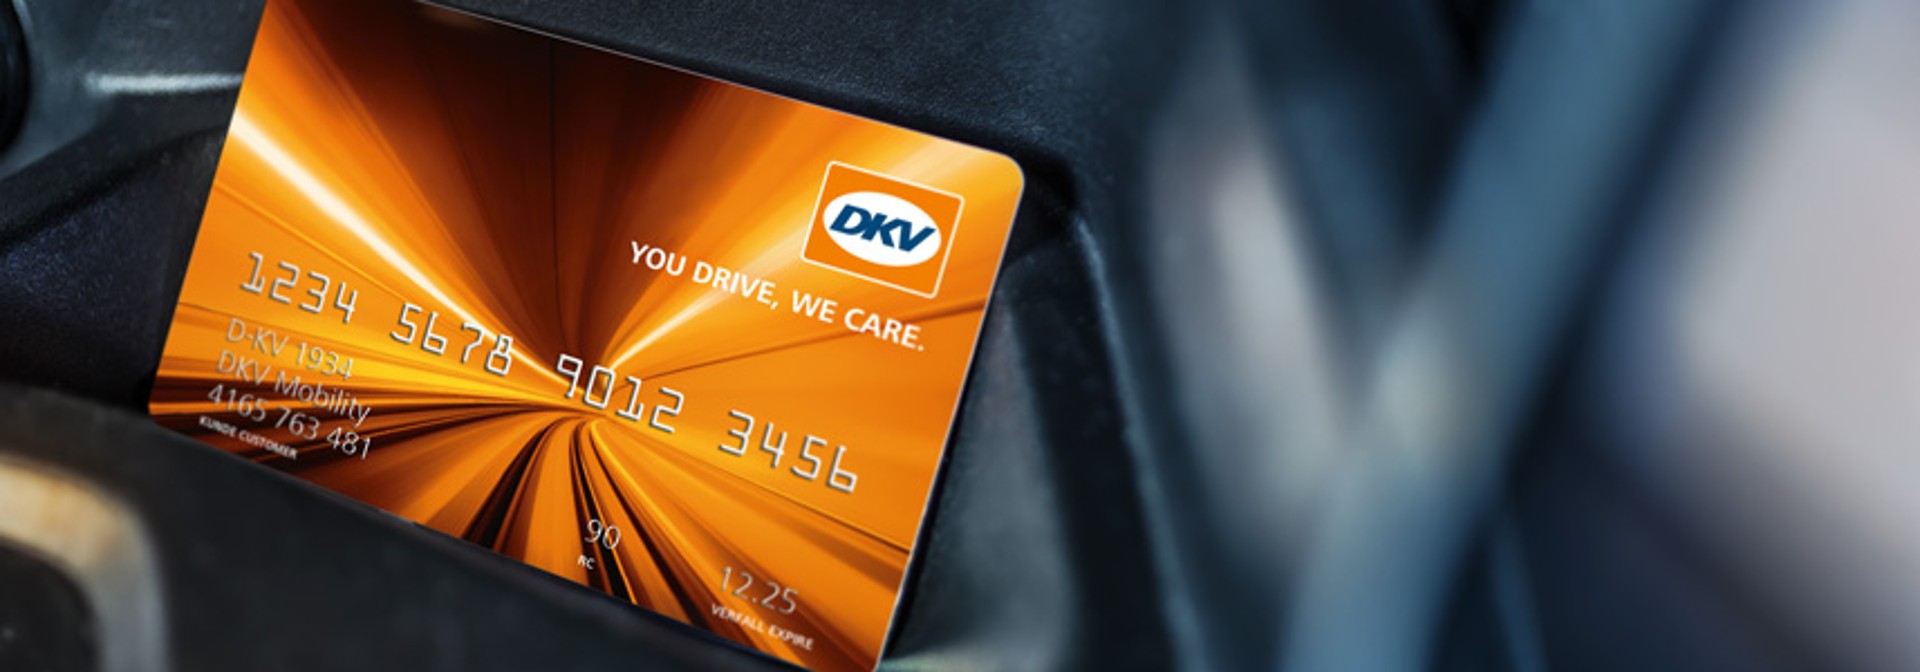 Easy Payment with the DKV Card